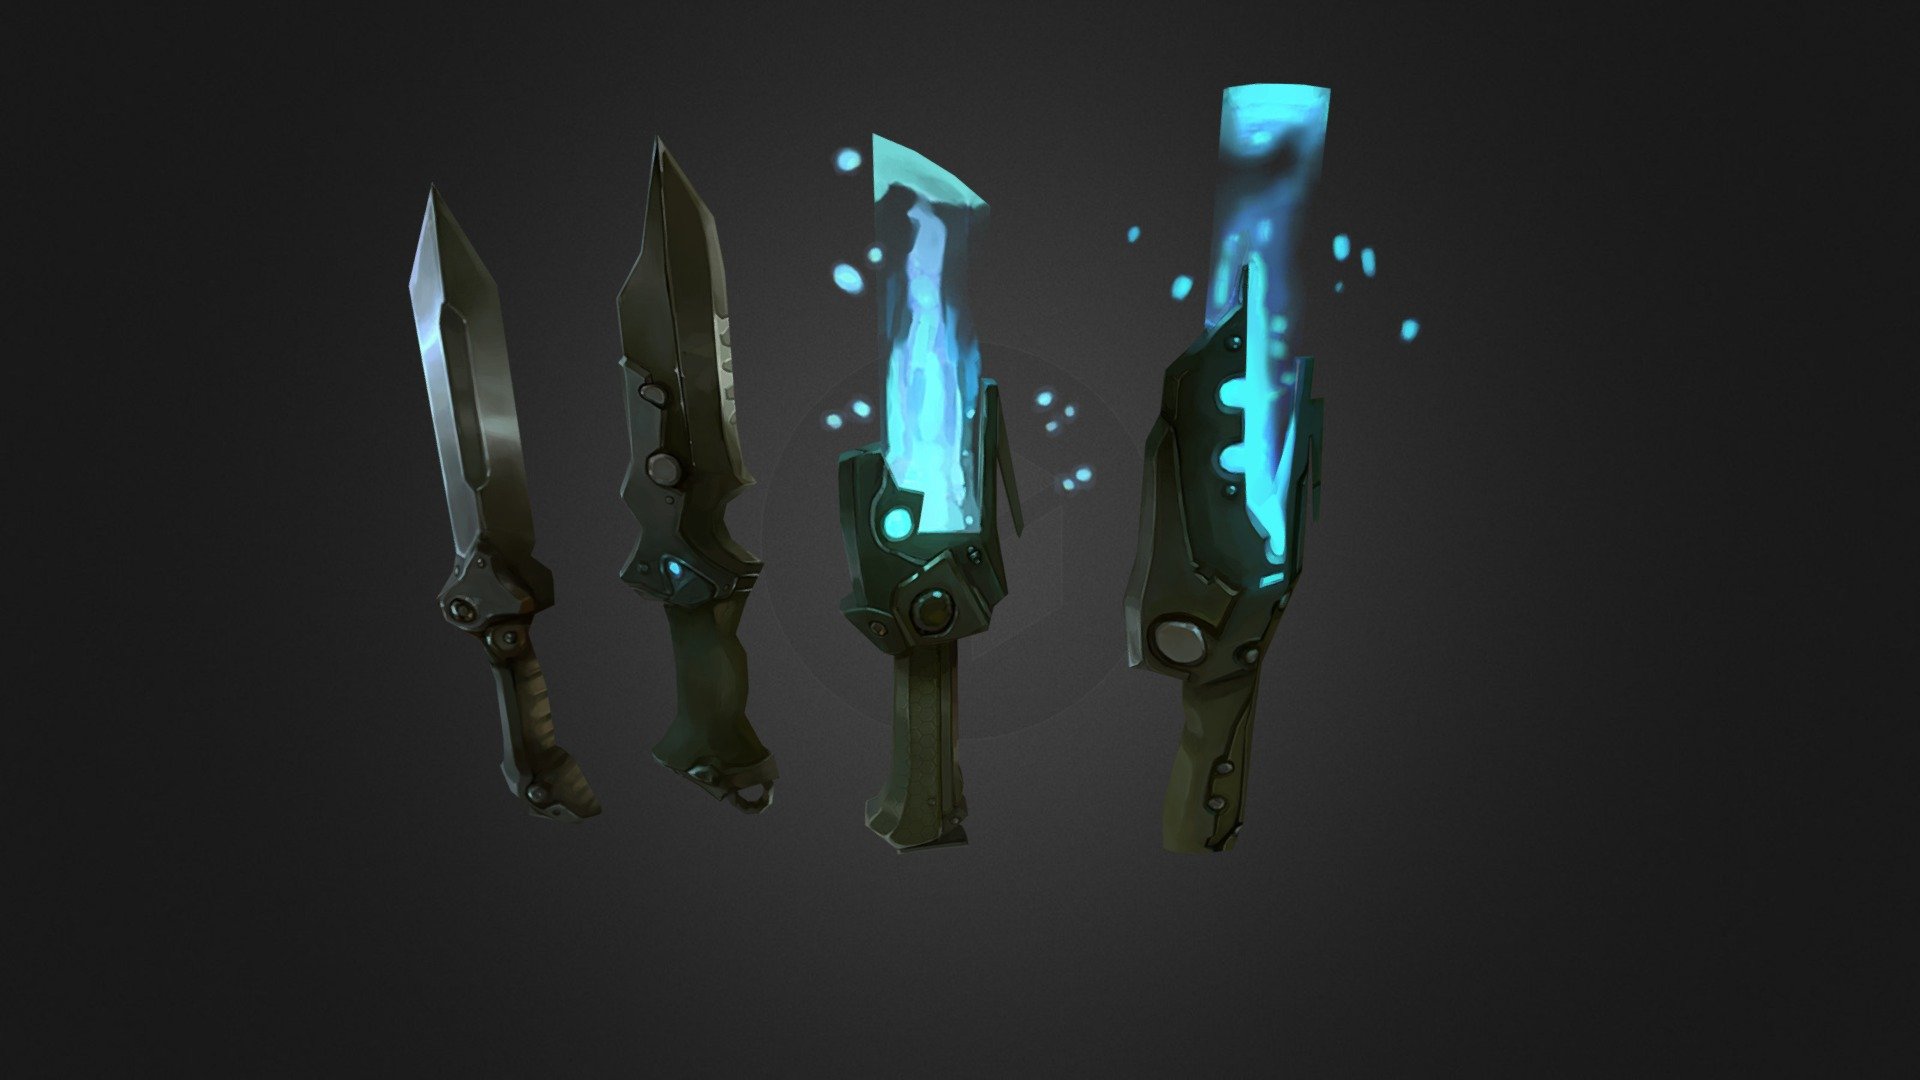 Did these for fun during the noob challenge over at polycount.com. Concept by Pavel Savchuk (http://sobaku-chiuchiu.deviantart.com/art/knives-268058844) 3d model